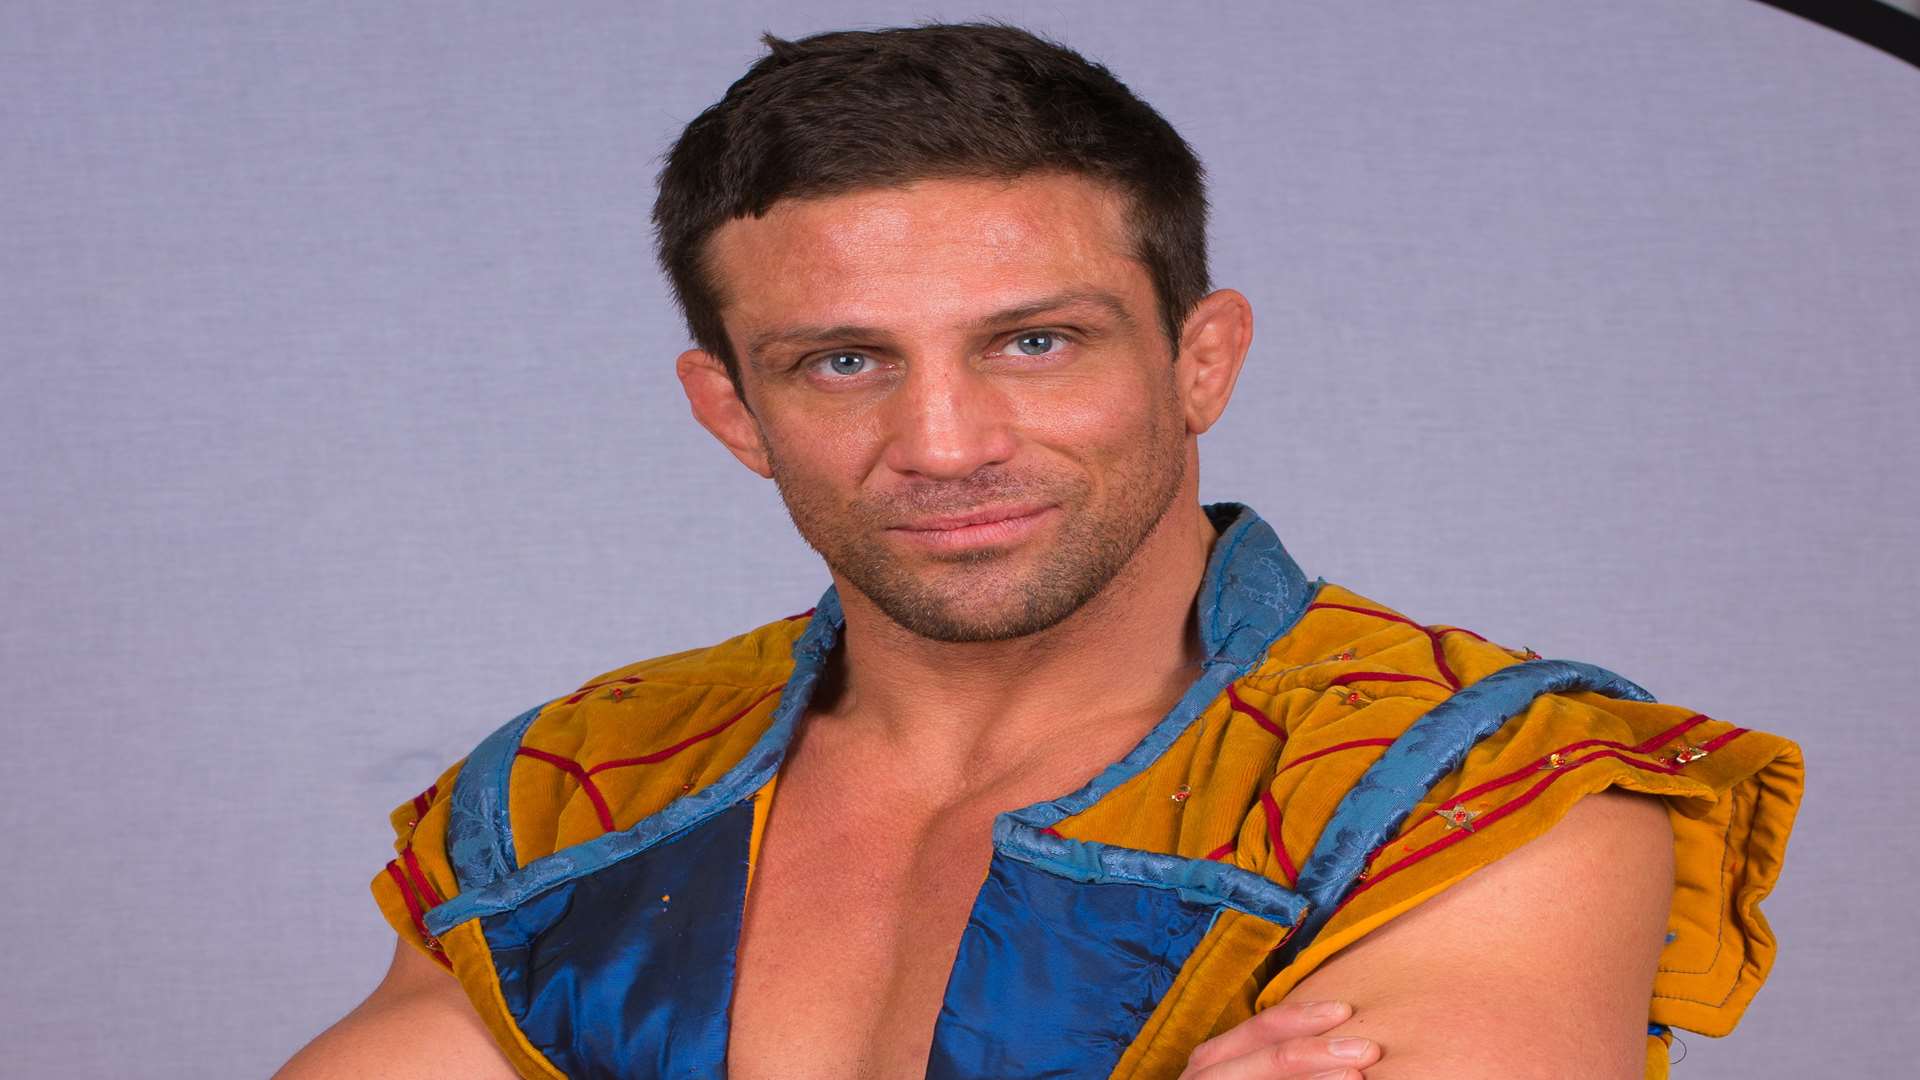 Alex Reid is set to play the evil Gaston in Beauty and The Beast at Swallows Leisure Centre, Sittingbourne.